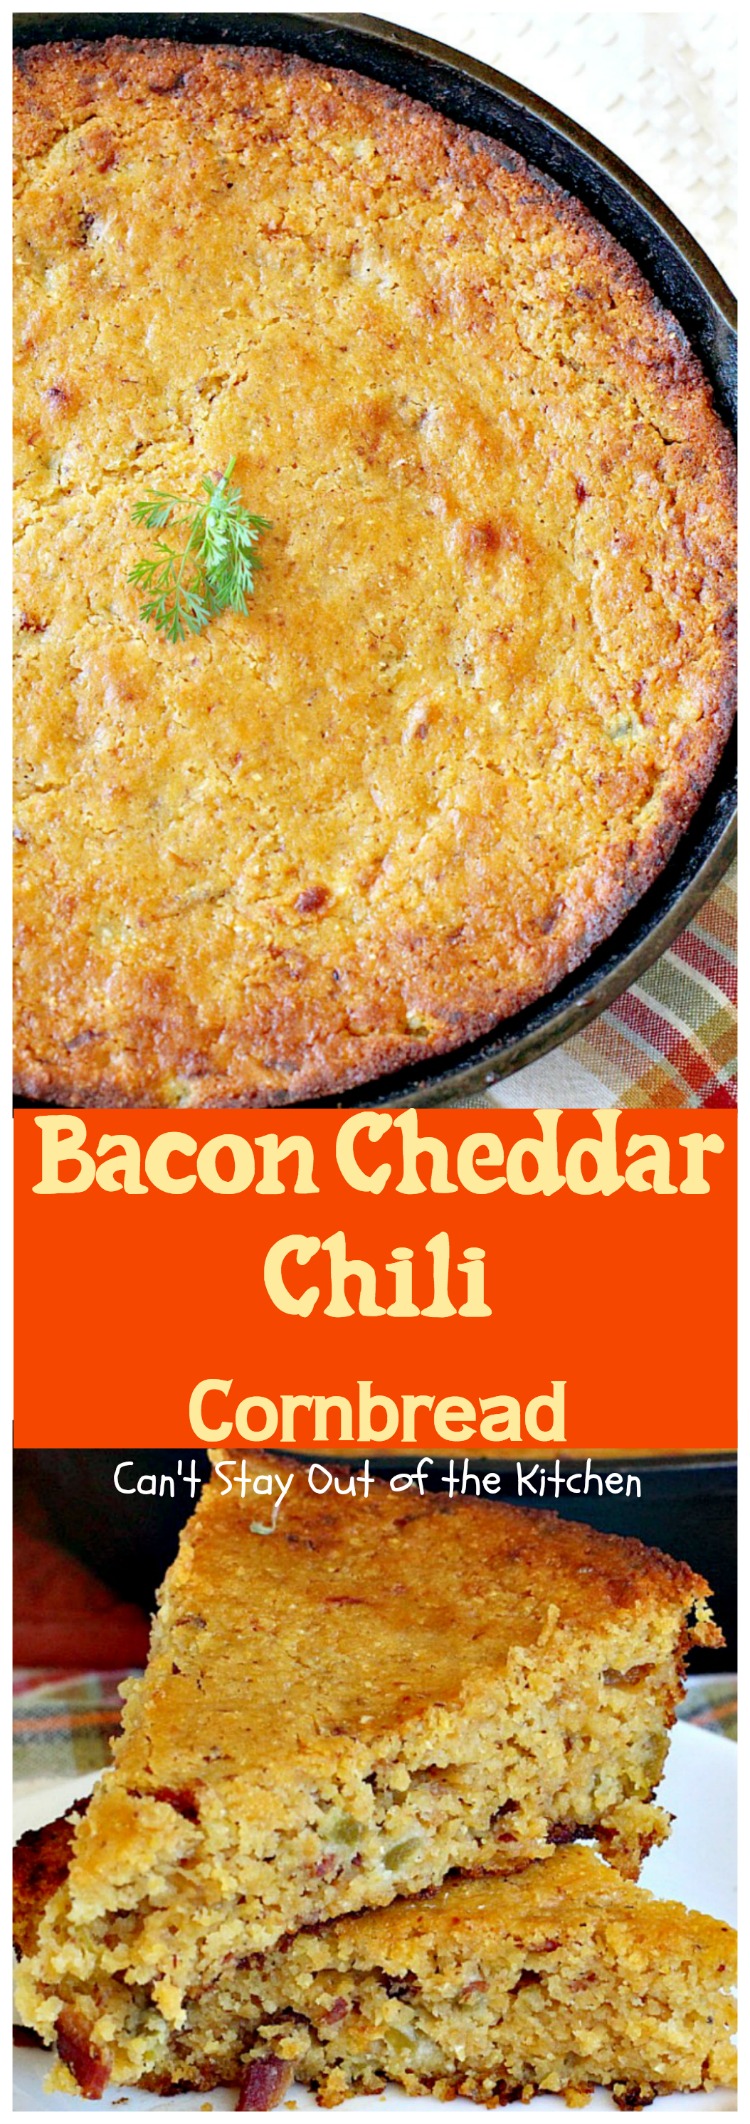 Bacon Cheddar Chili Cornbread | Can't Stay Out of the Kitchen | this #cornbread is absolutely spectacular! #bacon #cheddarcheese and #greenchilies make this so mouthwatering you'll be drooling from the first bite! #glutenfree